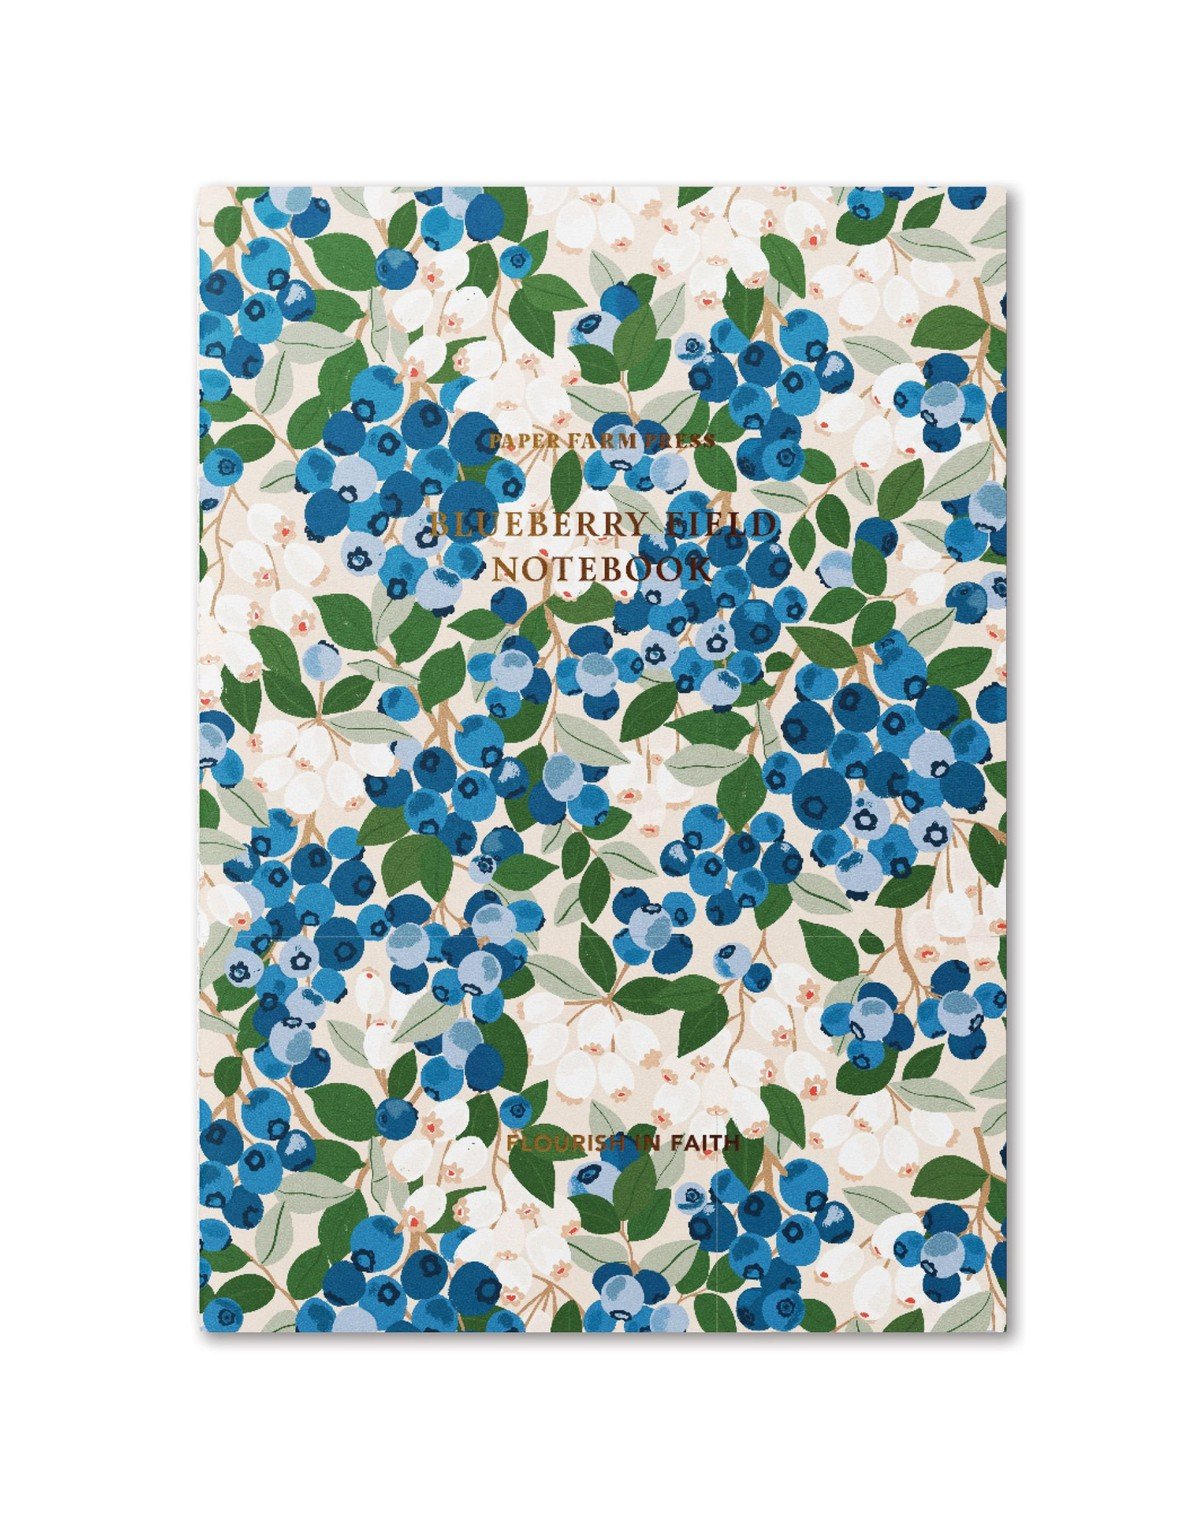 Flourish In Faith Blueberry Field Stitched Notebook item